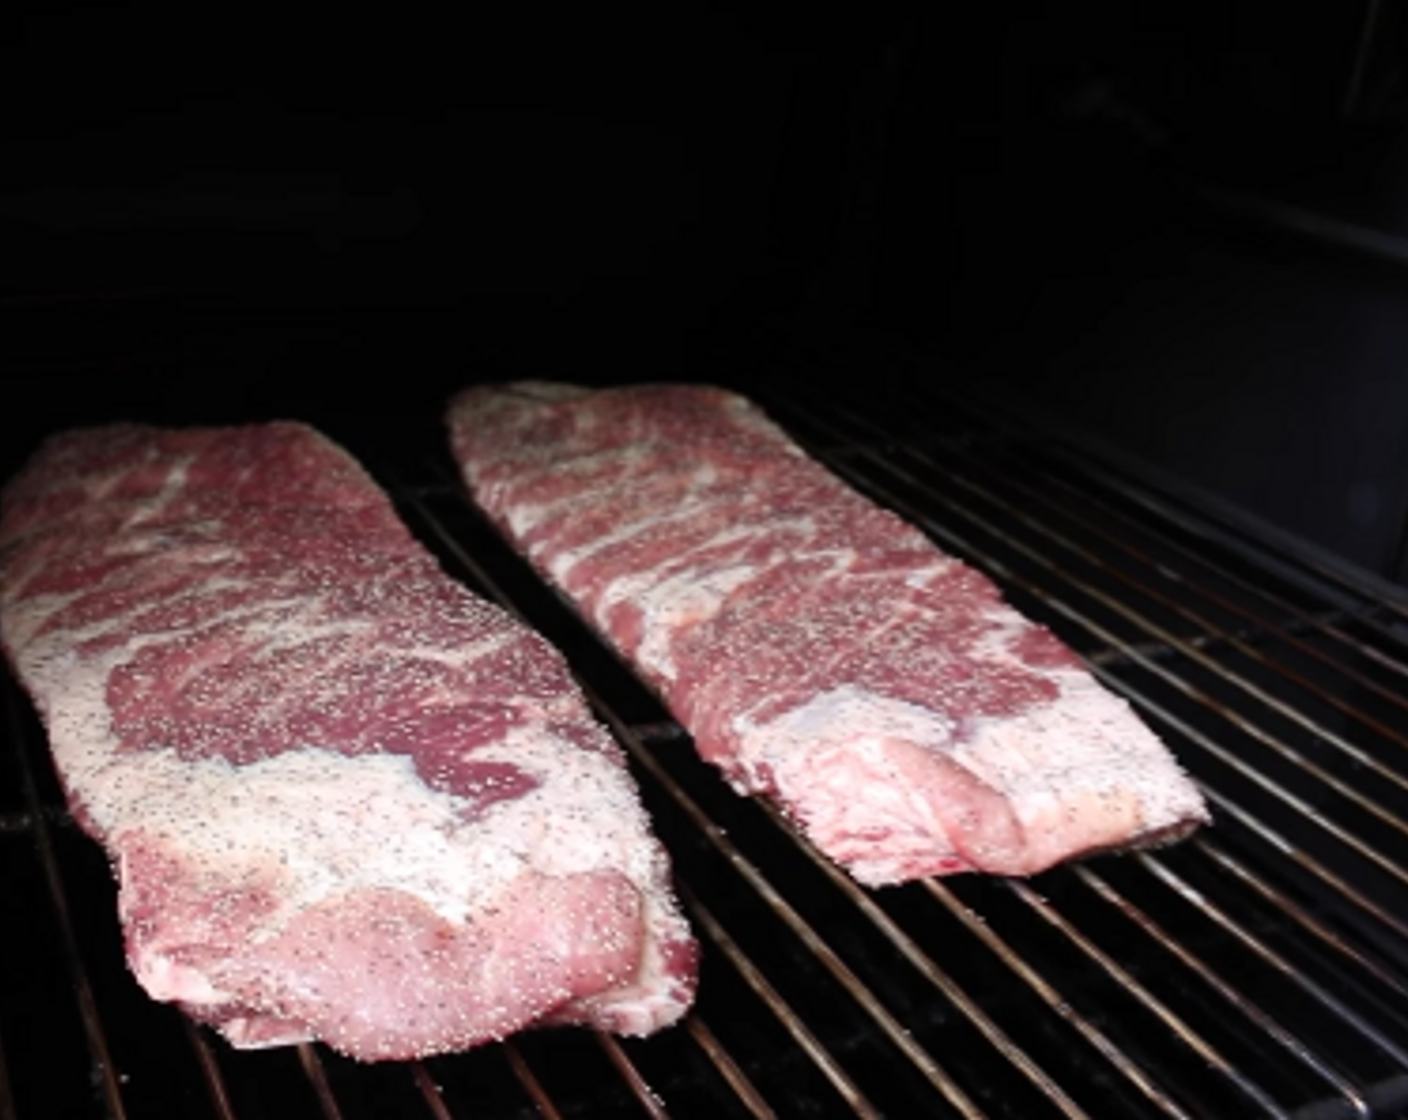 step 4 Place ribs on smoker and add pecan wood chunks to the fire for smoke. Cook for 2 1/2 hours.